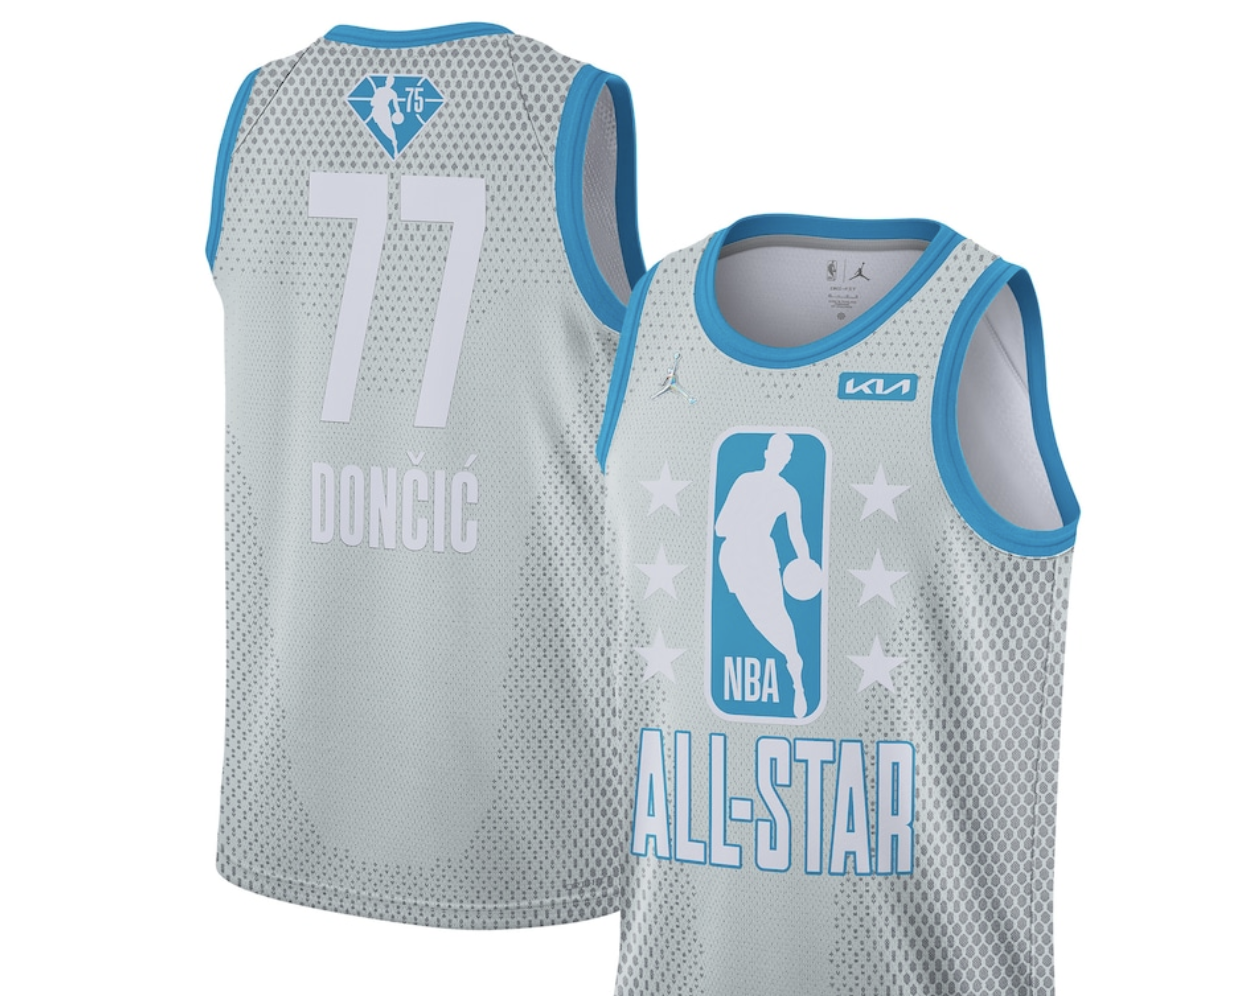 new all star jersey